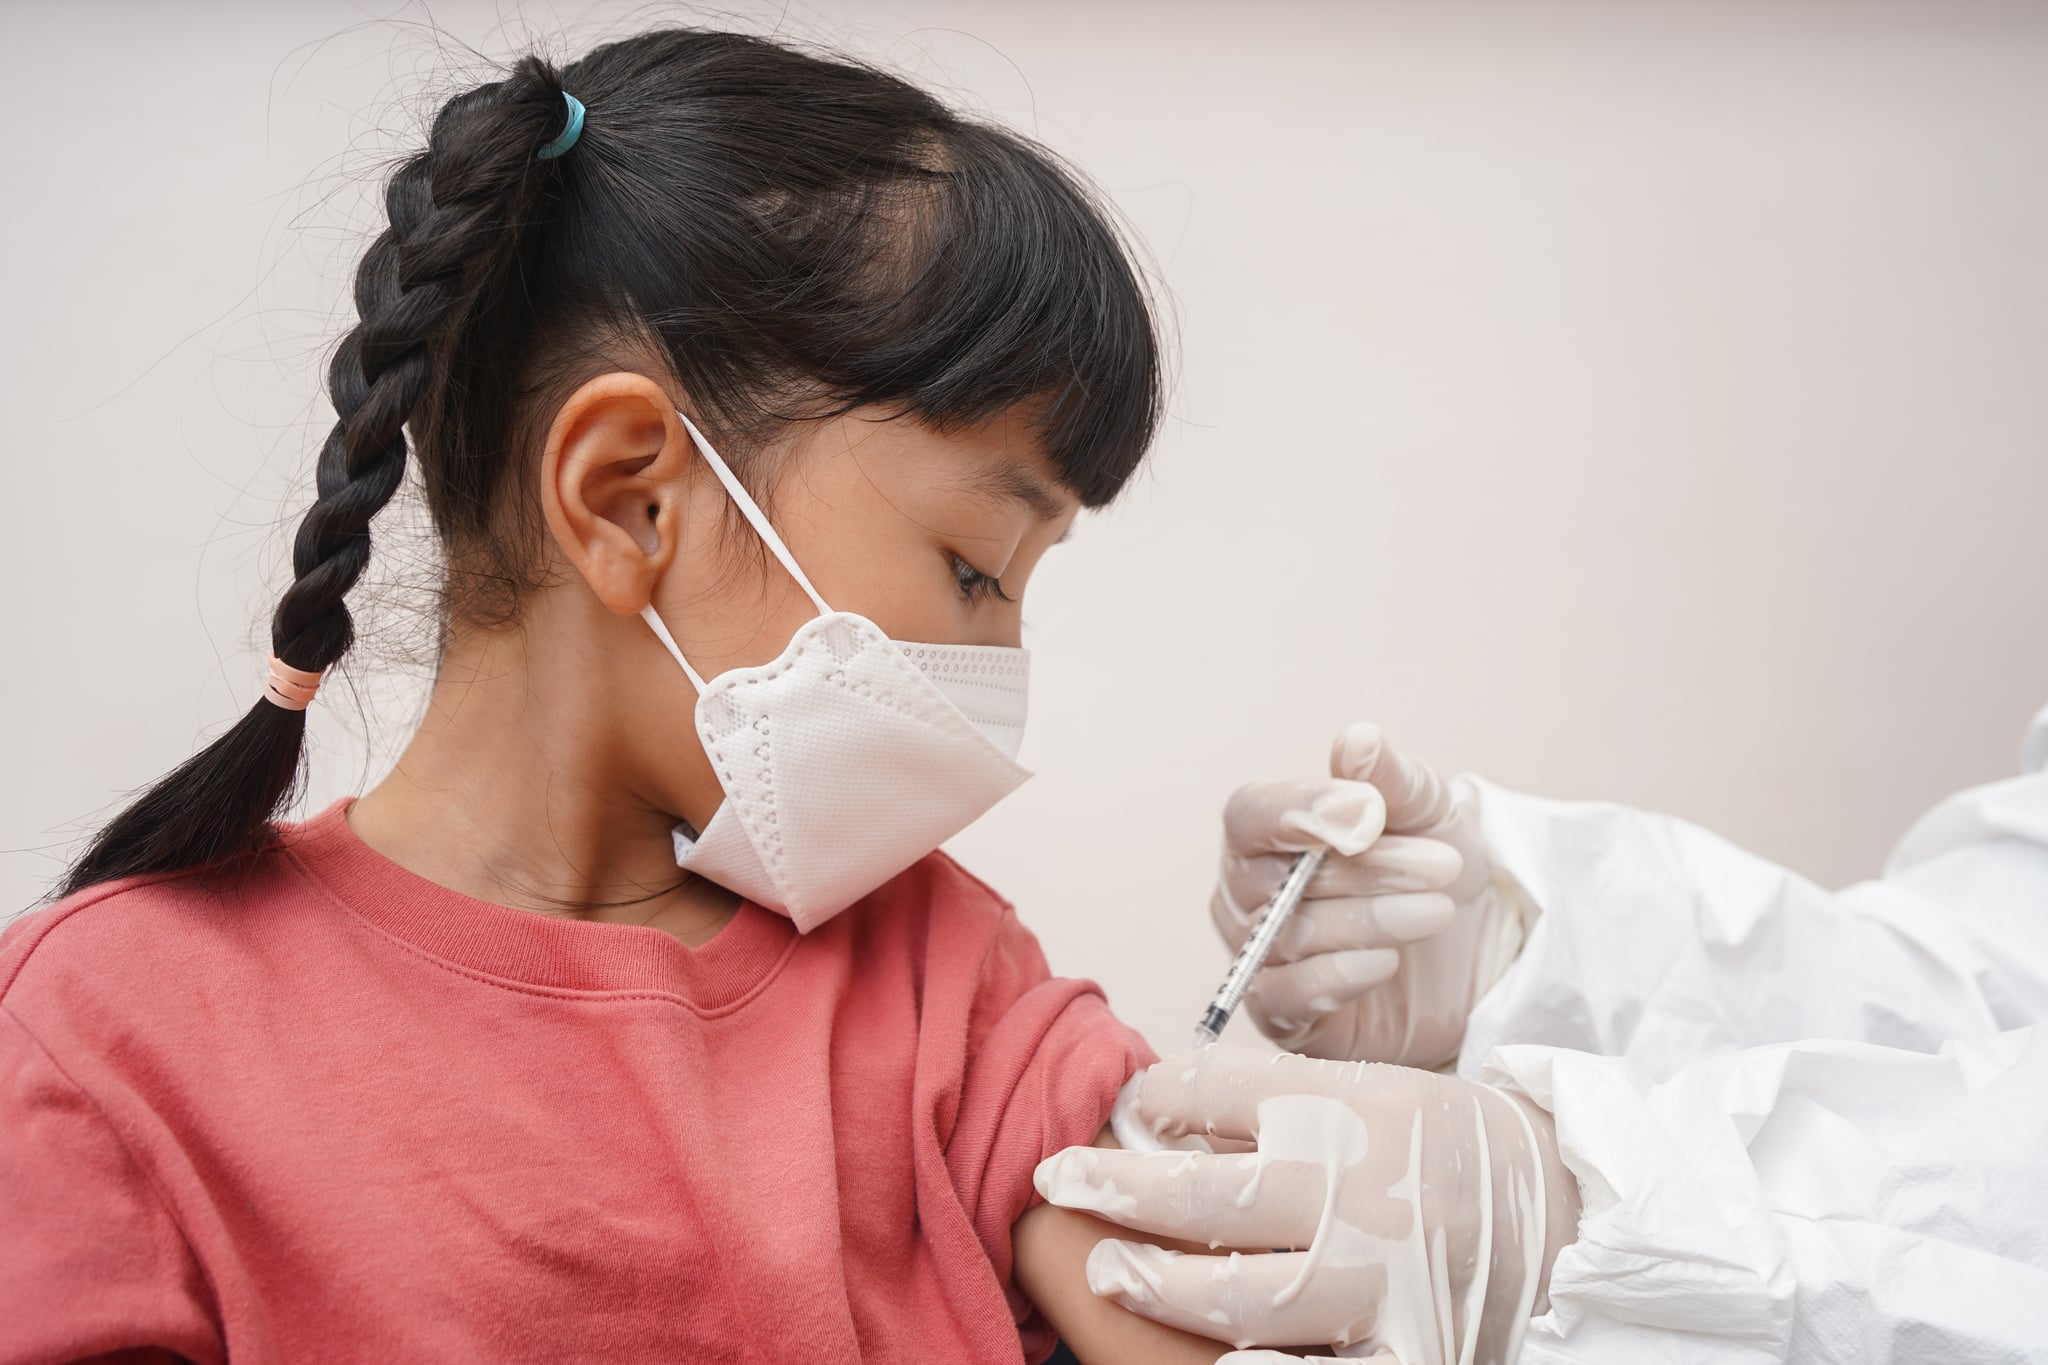 Little patient in face mask receiving coronavirus or flu vaccine shot from nurse at hospital.Vaccination, immunization, disease prevention concept.